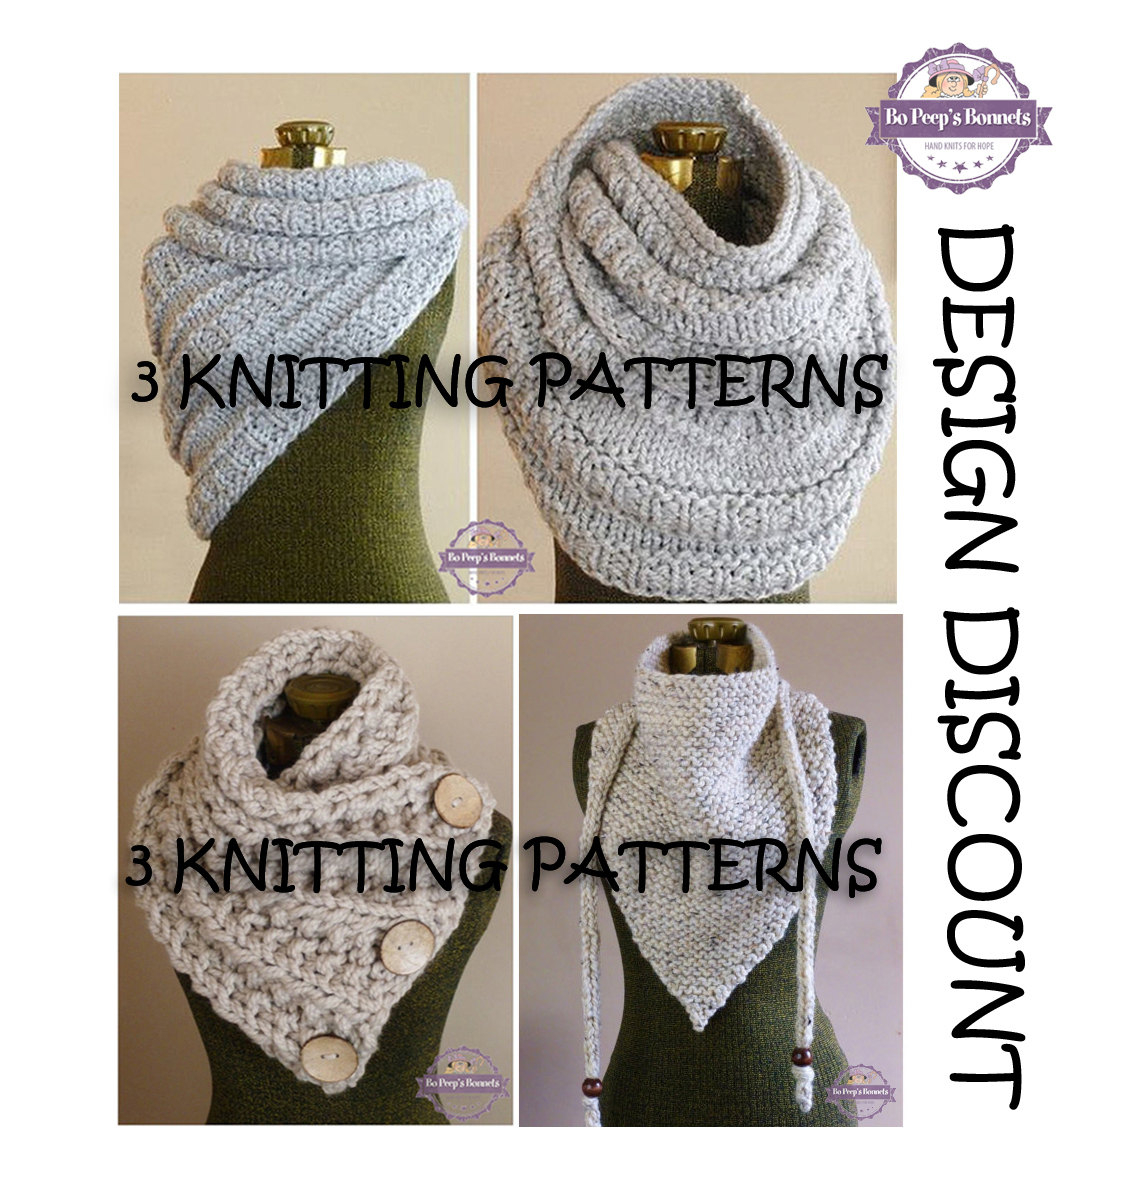 Knit Cowl Scarf Pattern 3 Knitting Patterns Knit Cowl Scarf Pattern Design Discount Huntress Cowllancaster Scarftriangle Scarf Combo Pack Scarf Patterns